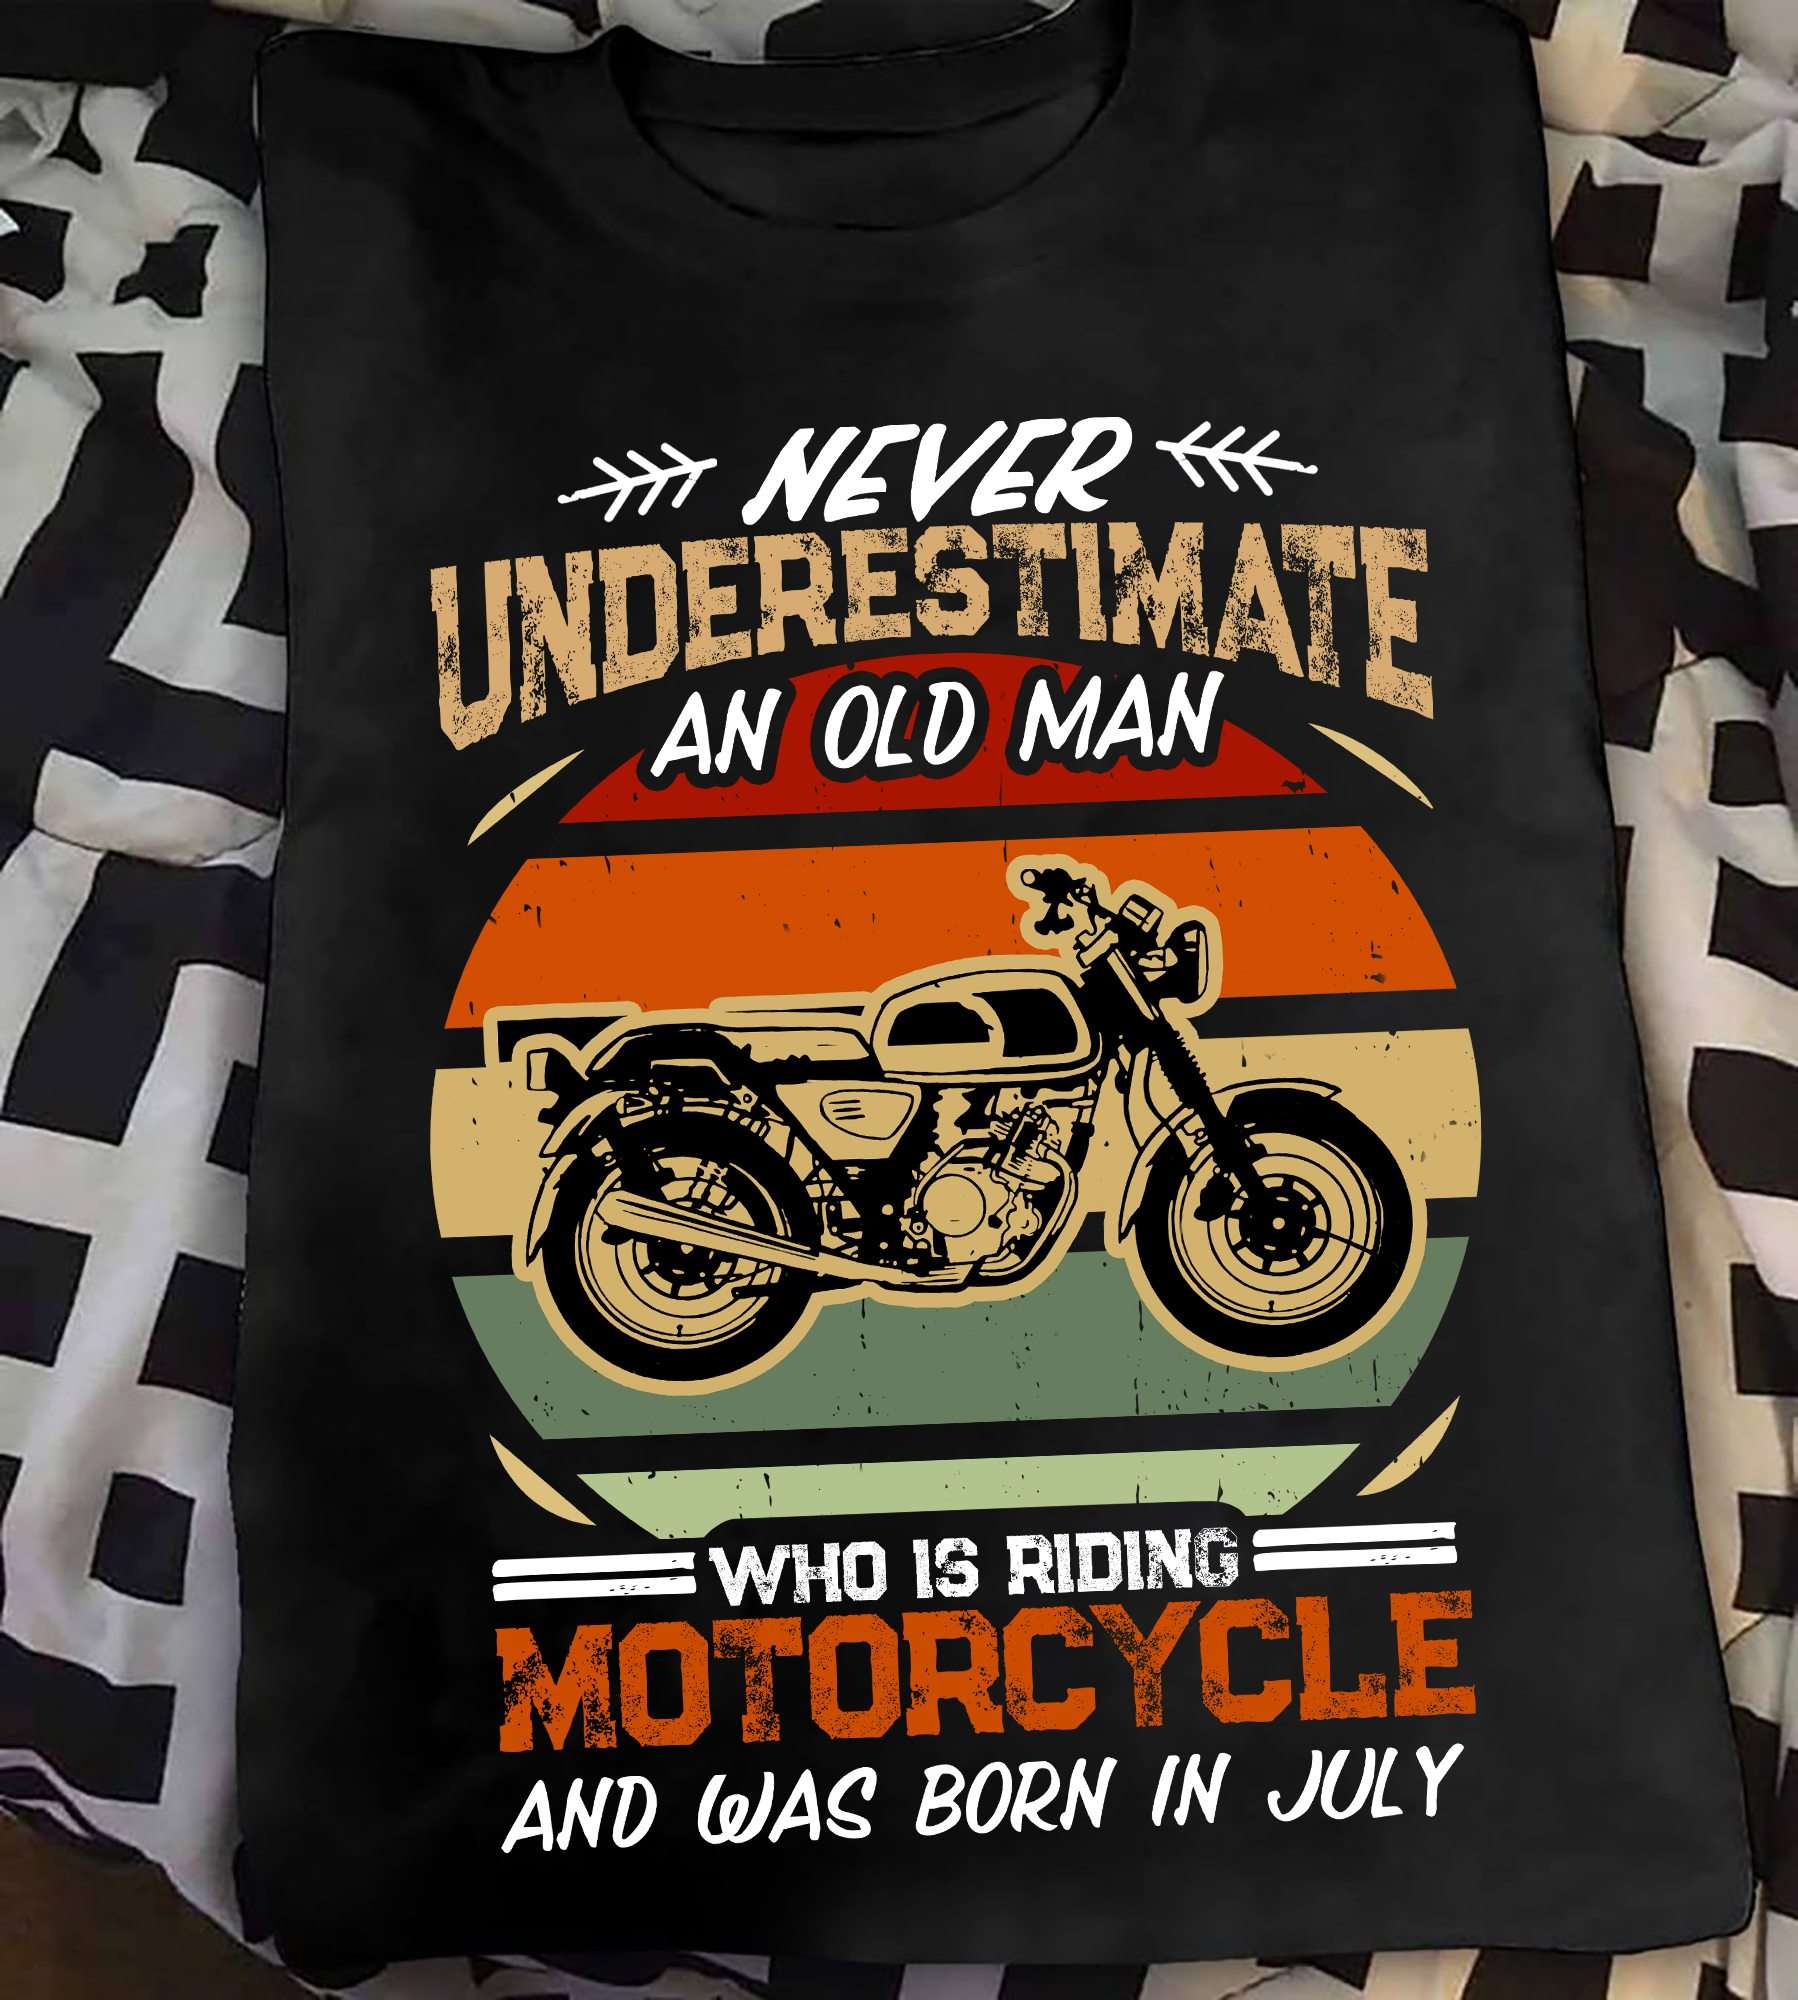 Never underestimate an old man who is riding motorcycle and was born in July